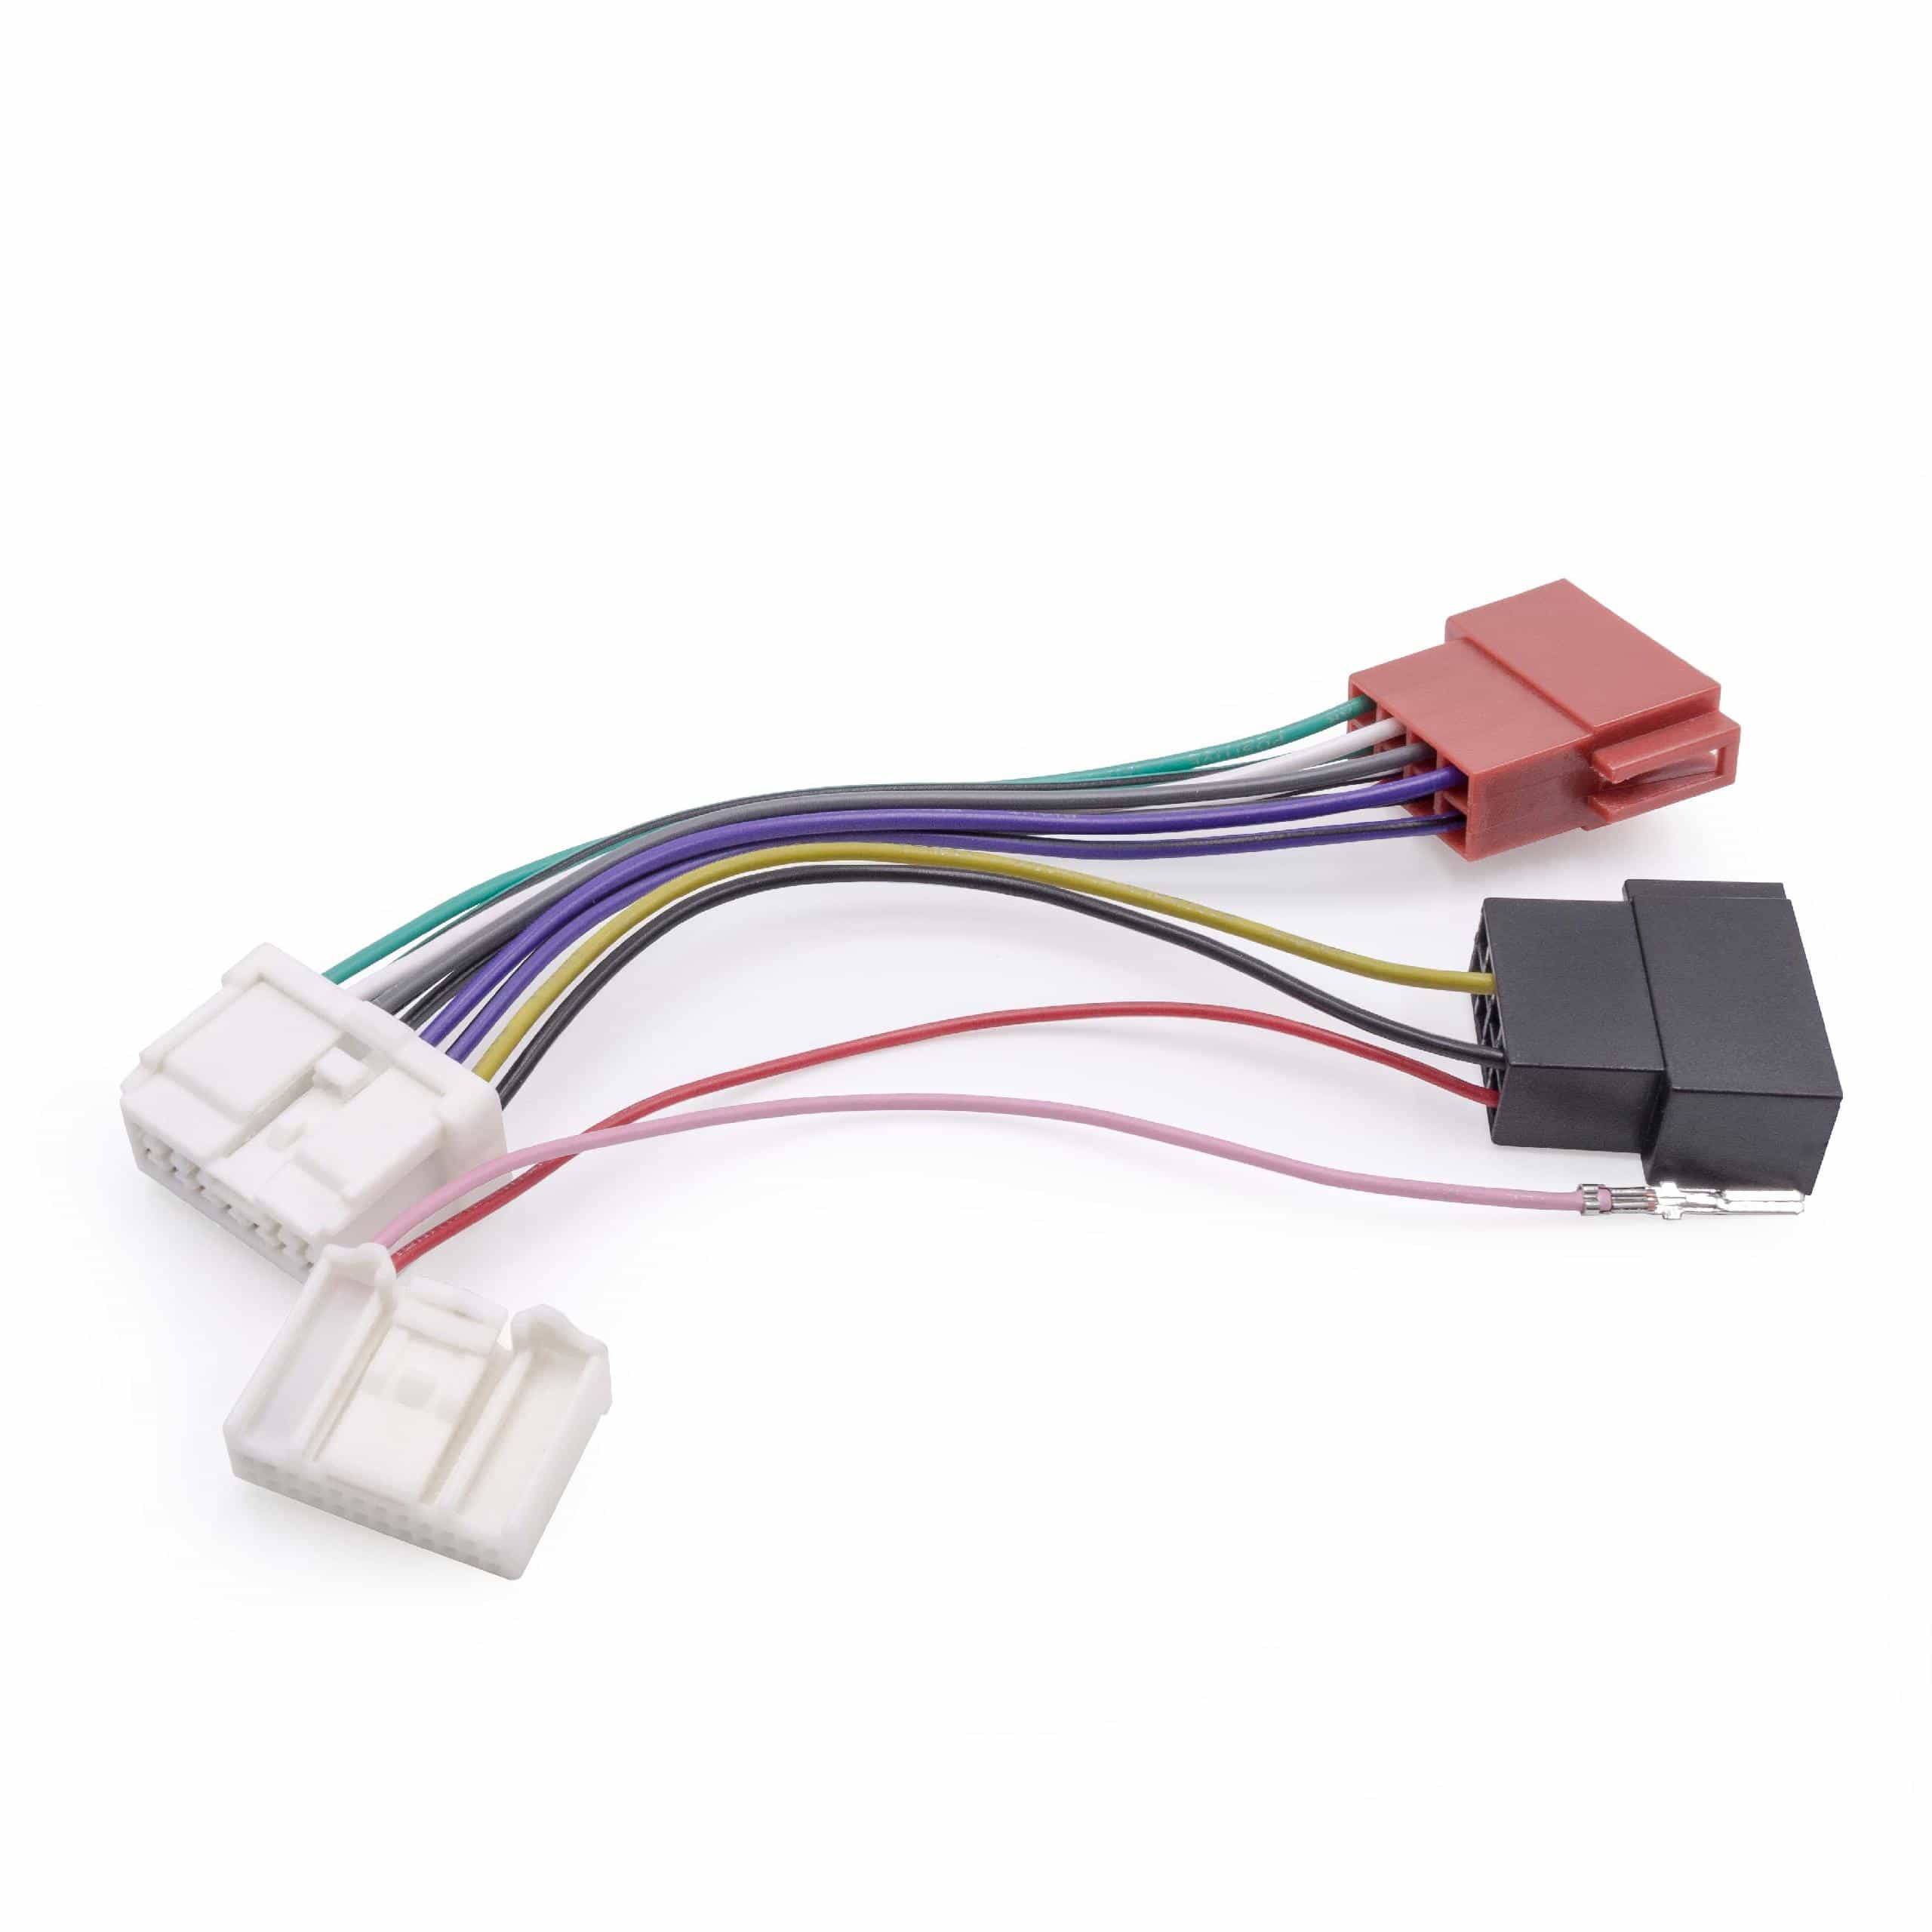 ISO Adapter suitable for from 2012 RenaultCar Radio etc. - ISO 10487 Plug